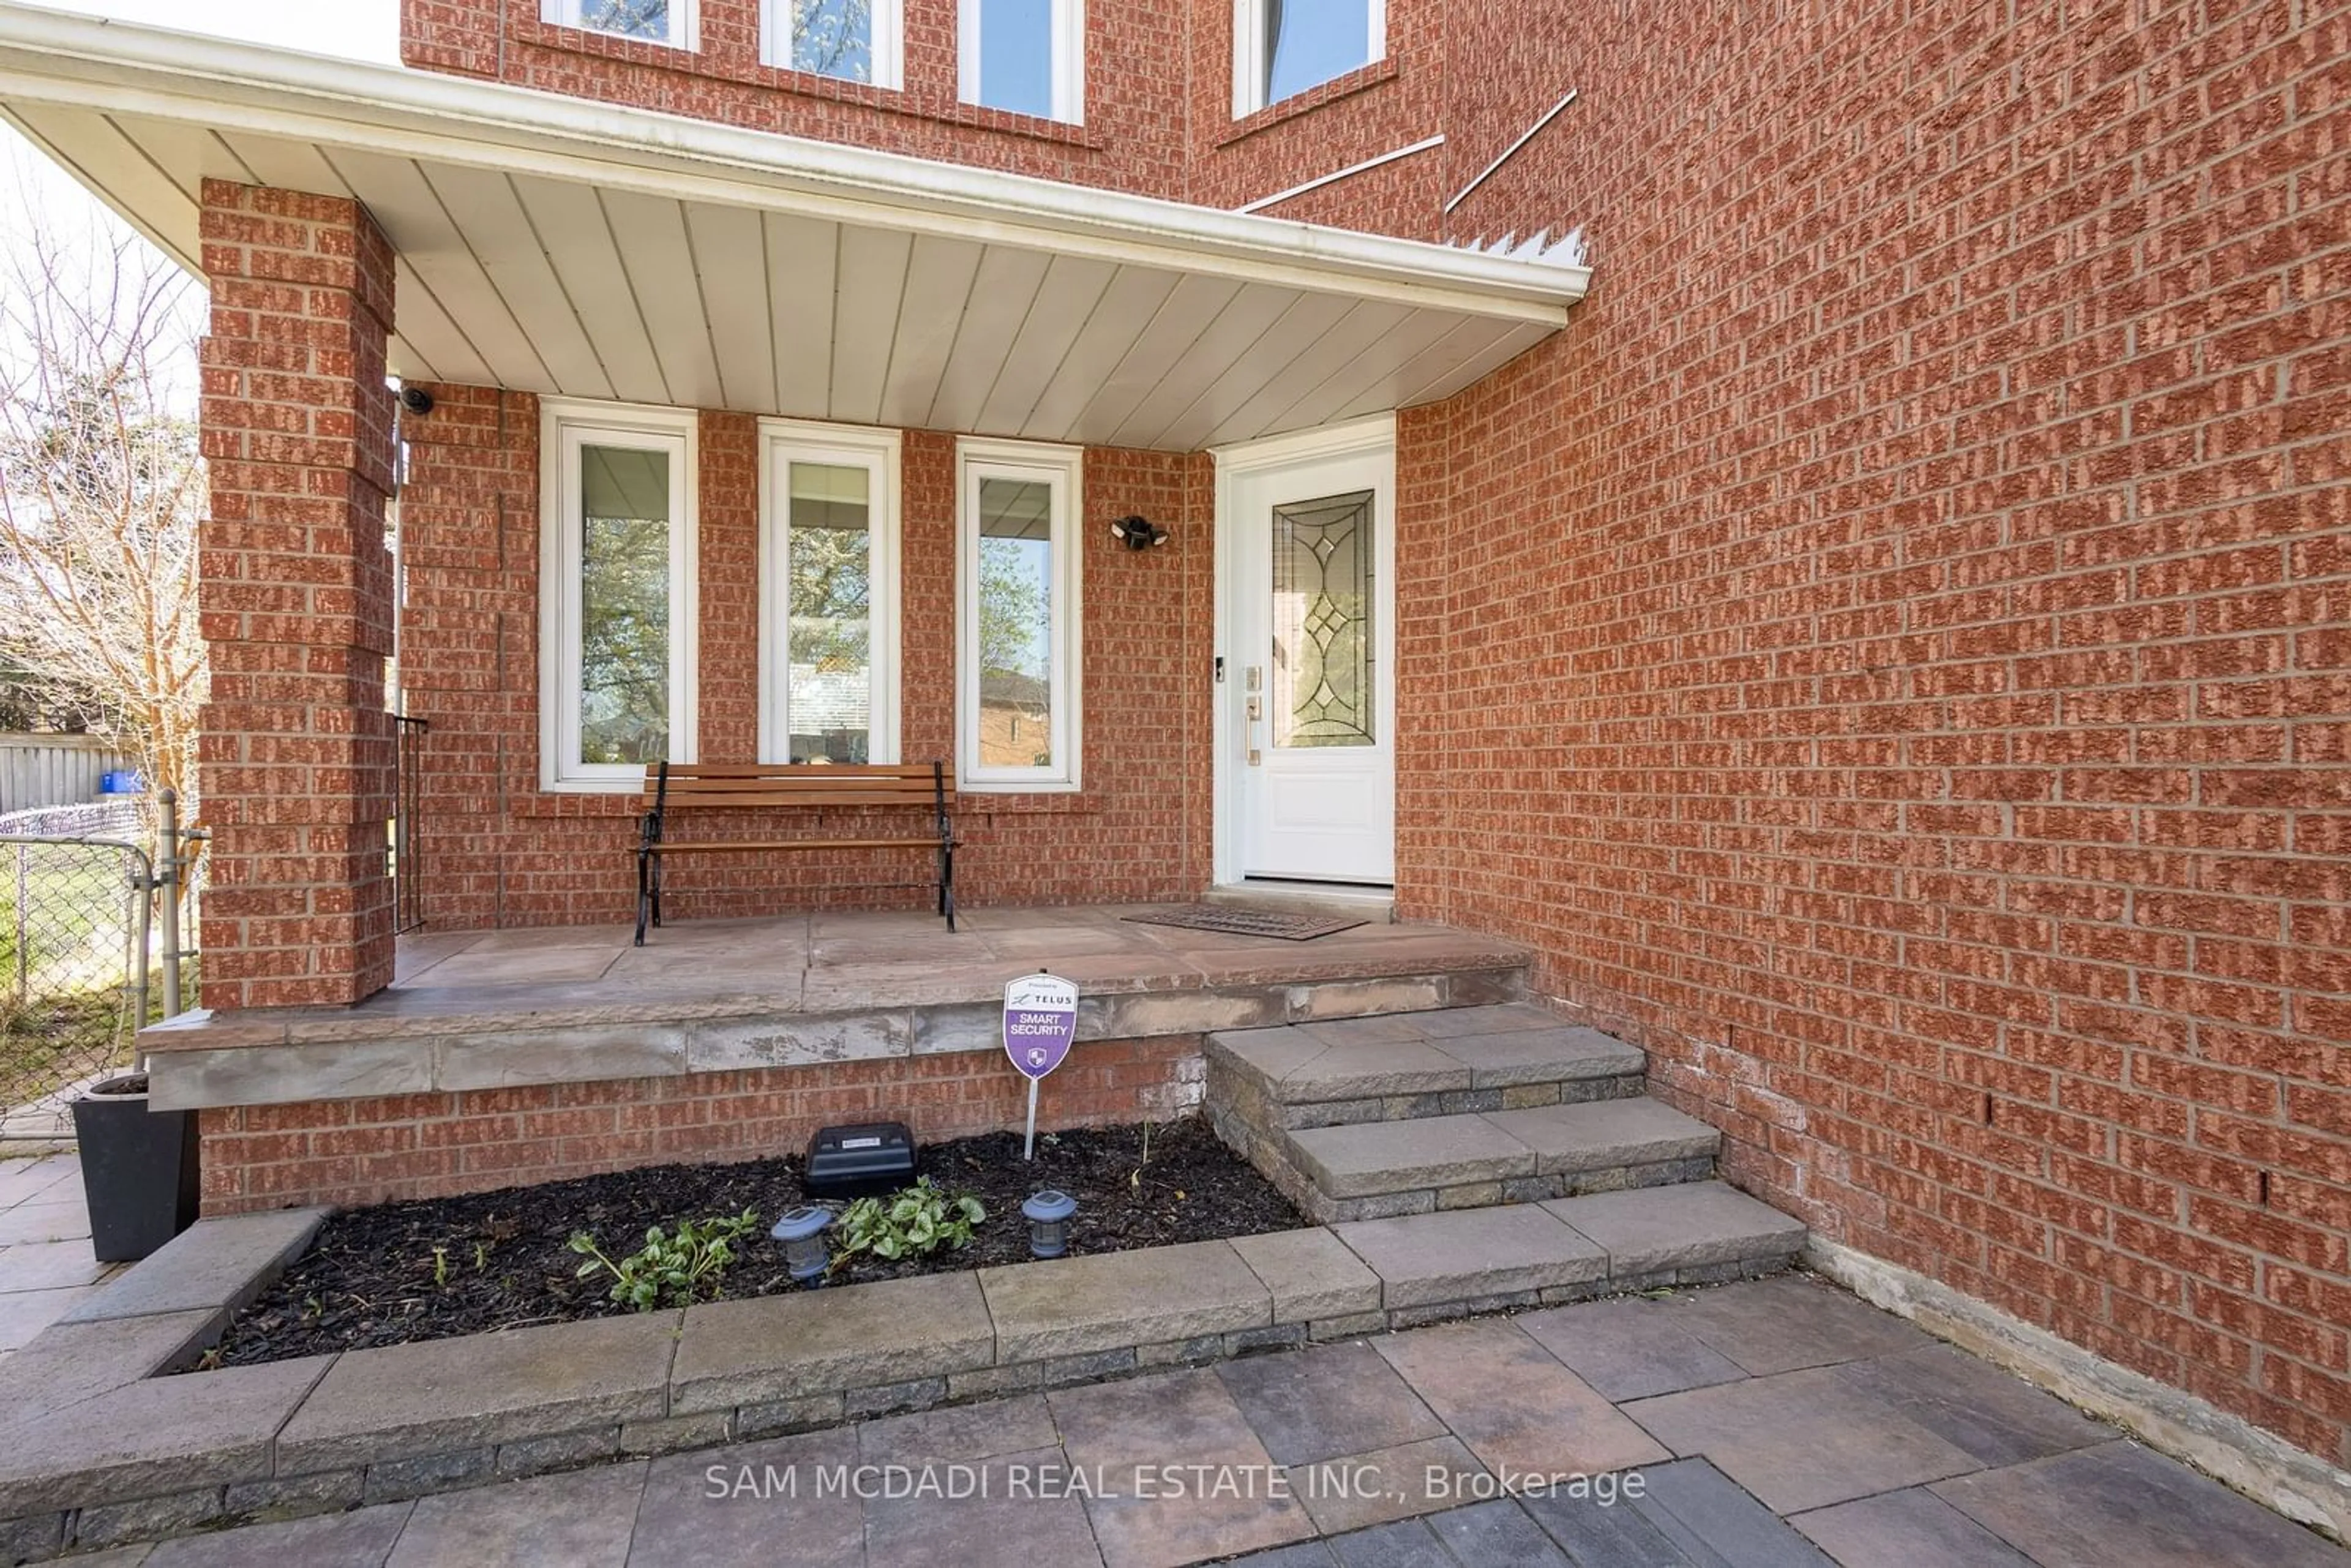 Home with brick exterior material for 1486 Emerson Lane, Mississauga Ontario L5V 1L6